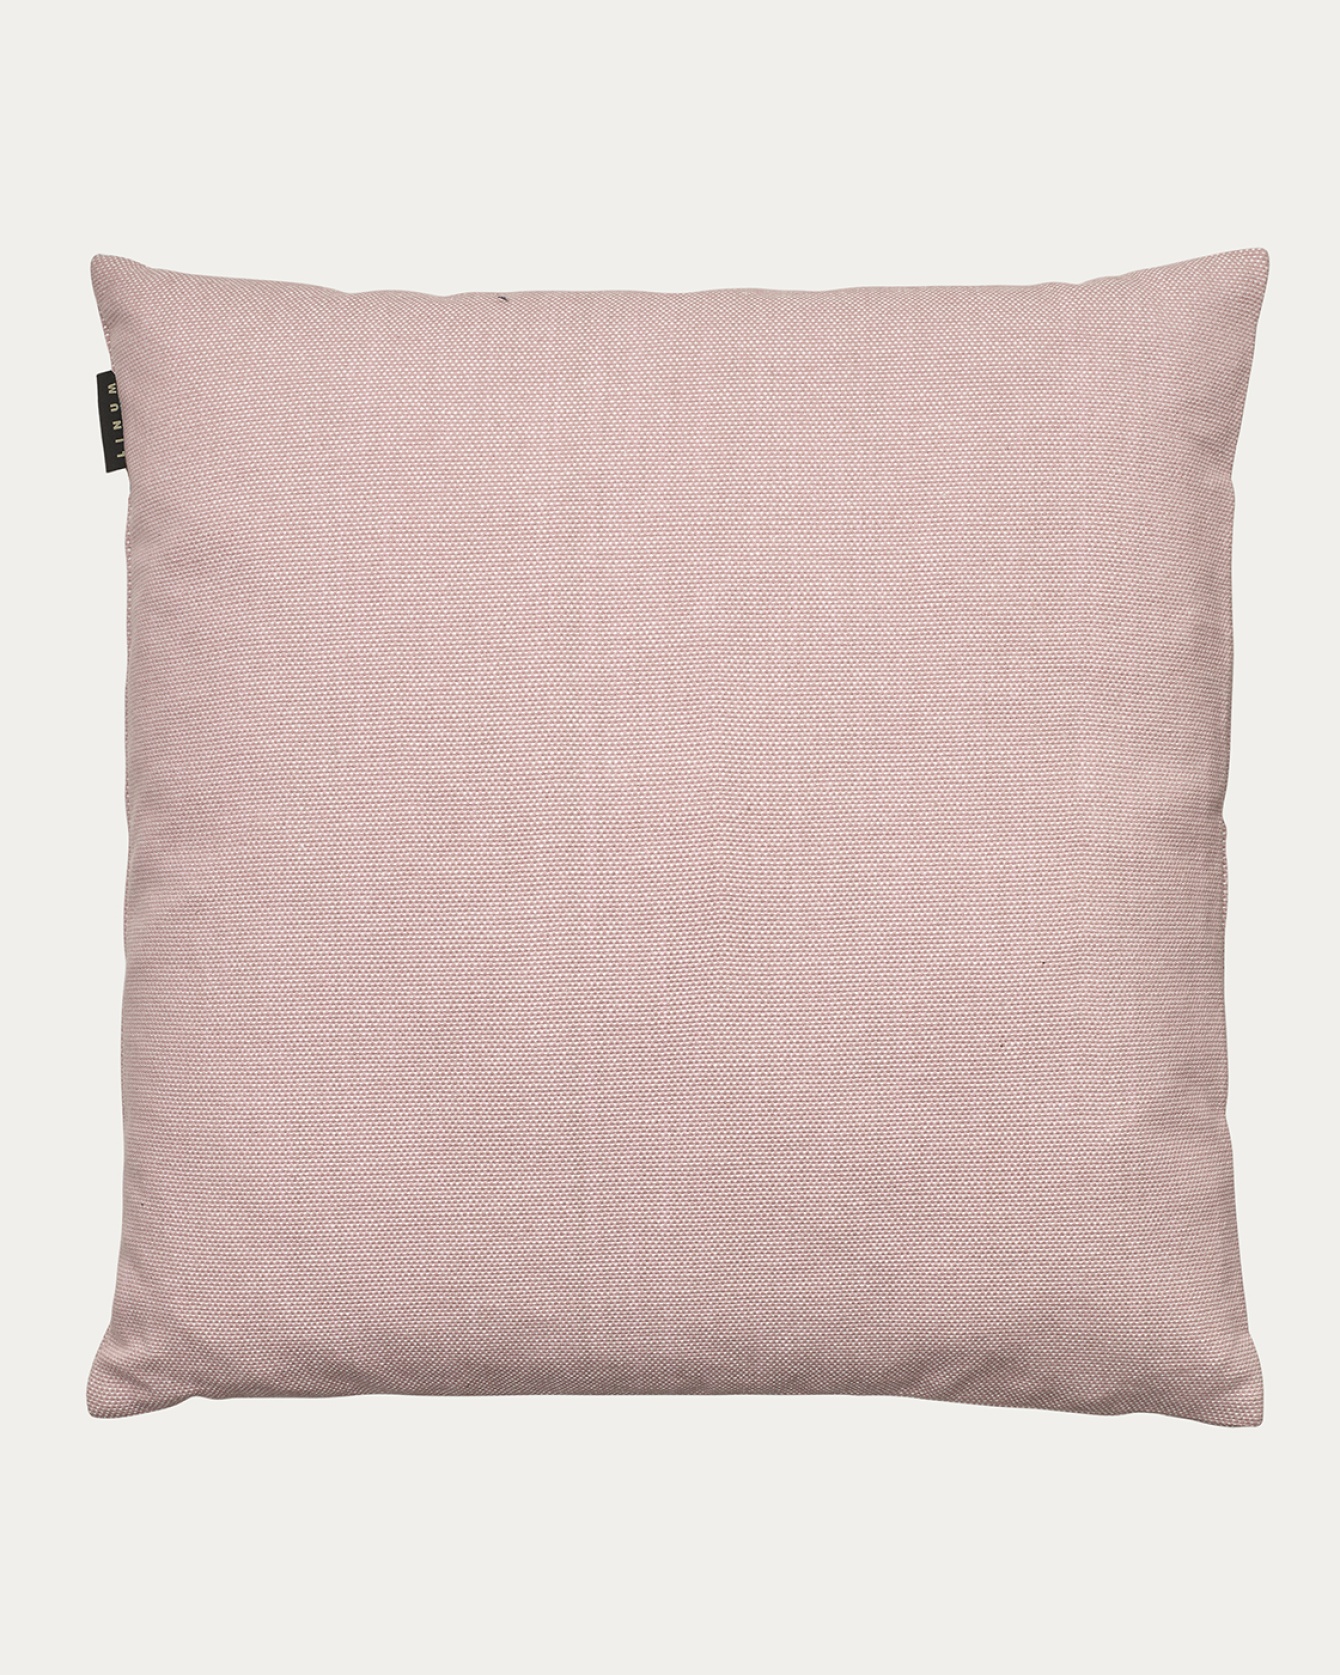 PEPPER Cushion cover 60x60 cm Dusty pink